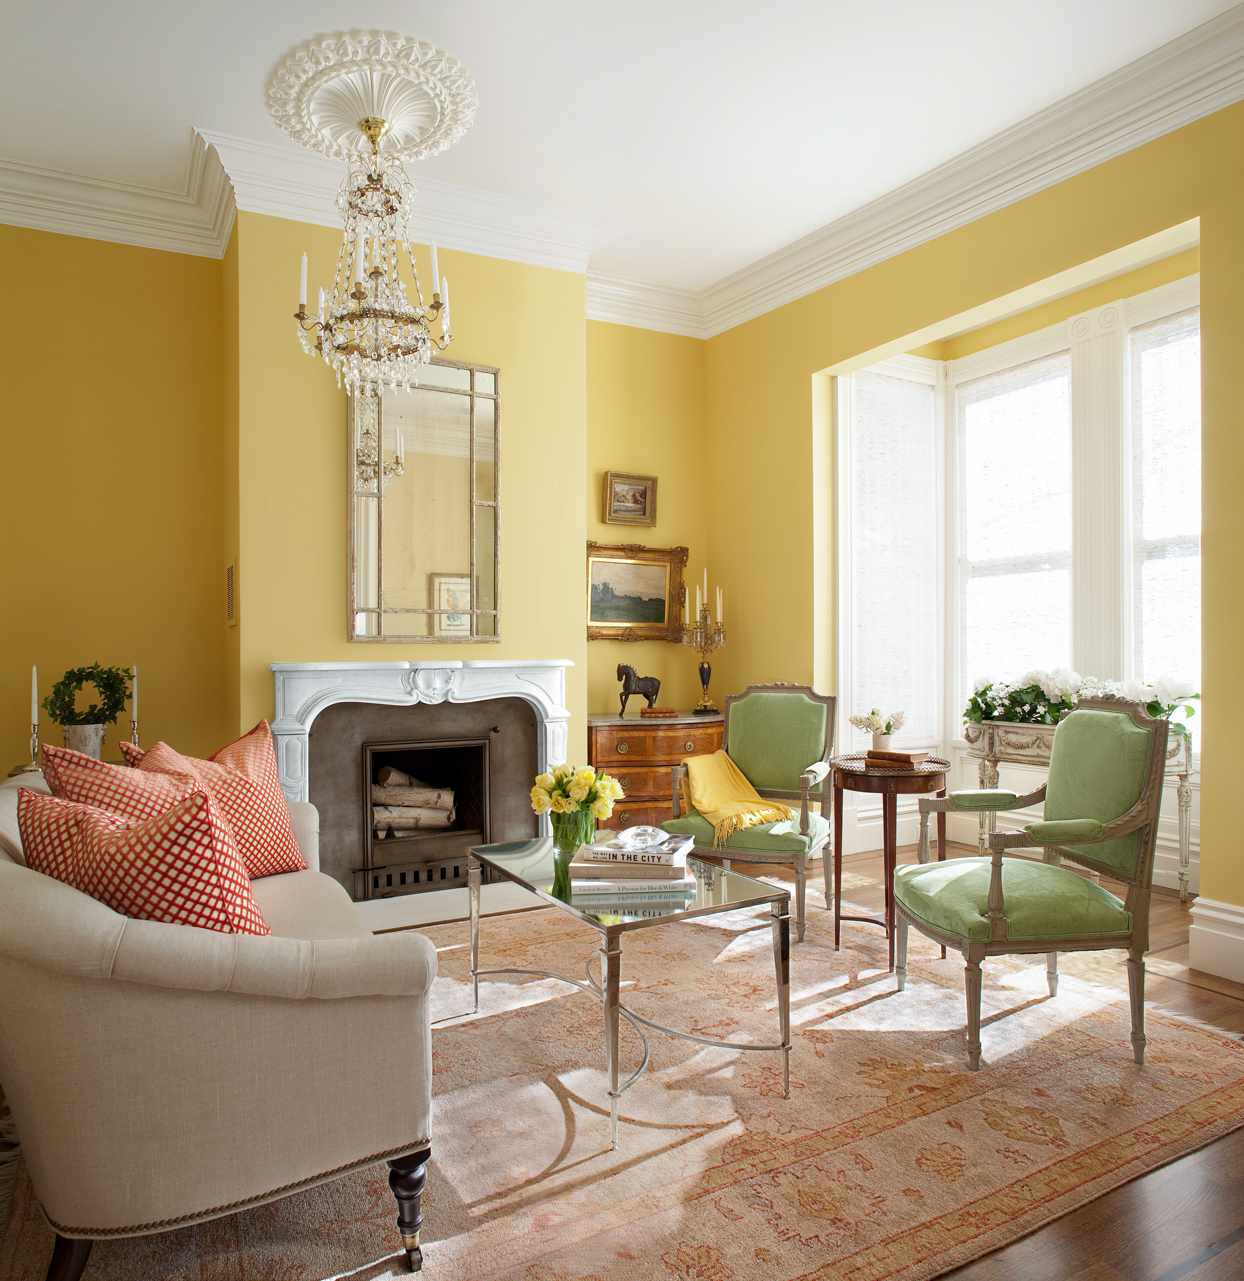 23 Yellow Living Room Ideas for a Bright, Happy Space | Better Homes